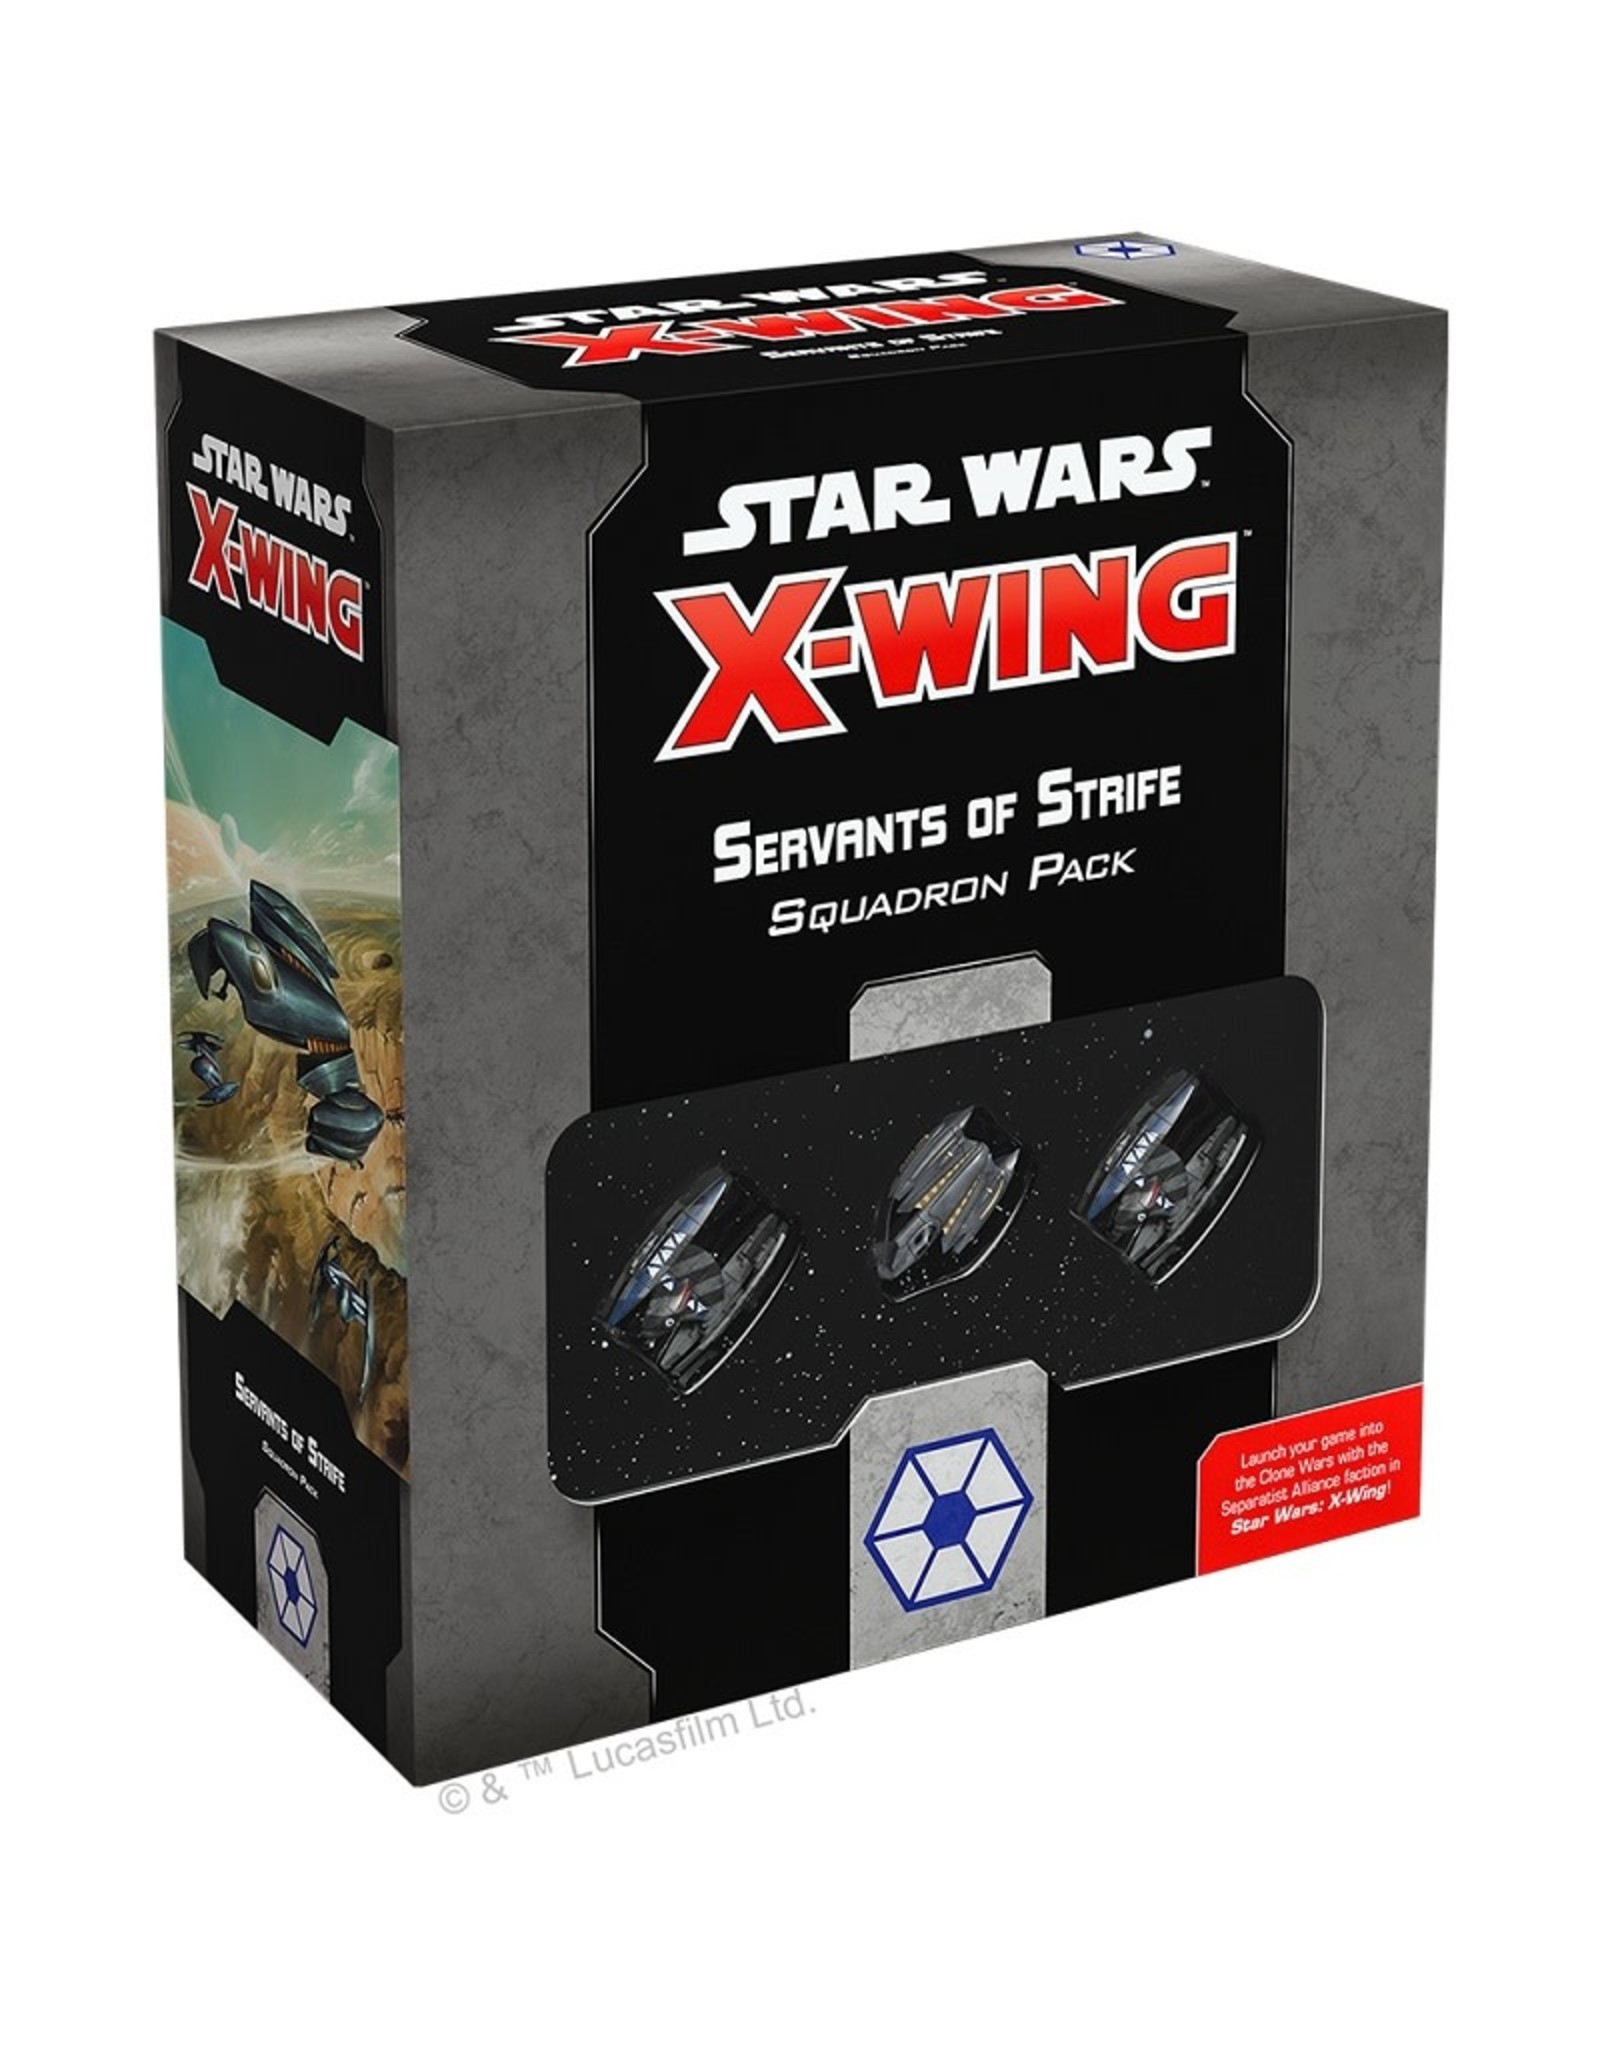 Atomic Mass Games Star Wars X-Wing: Servants of Strife Squadron Pack - 2nd Edition